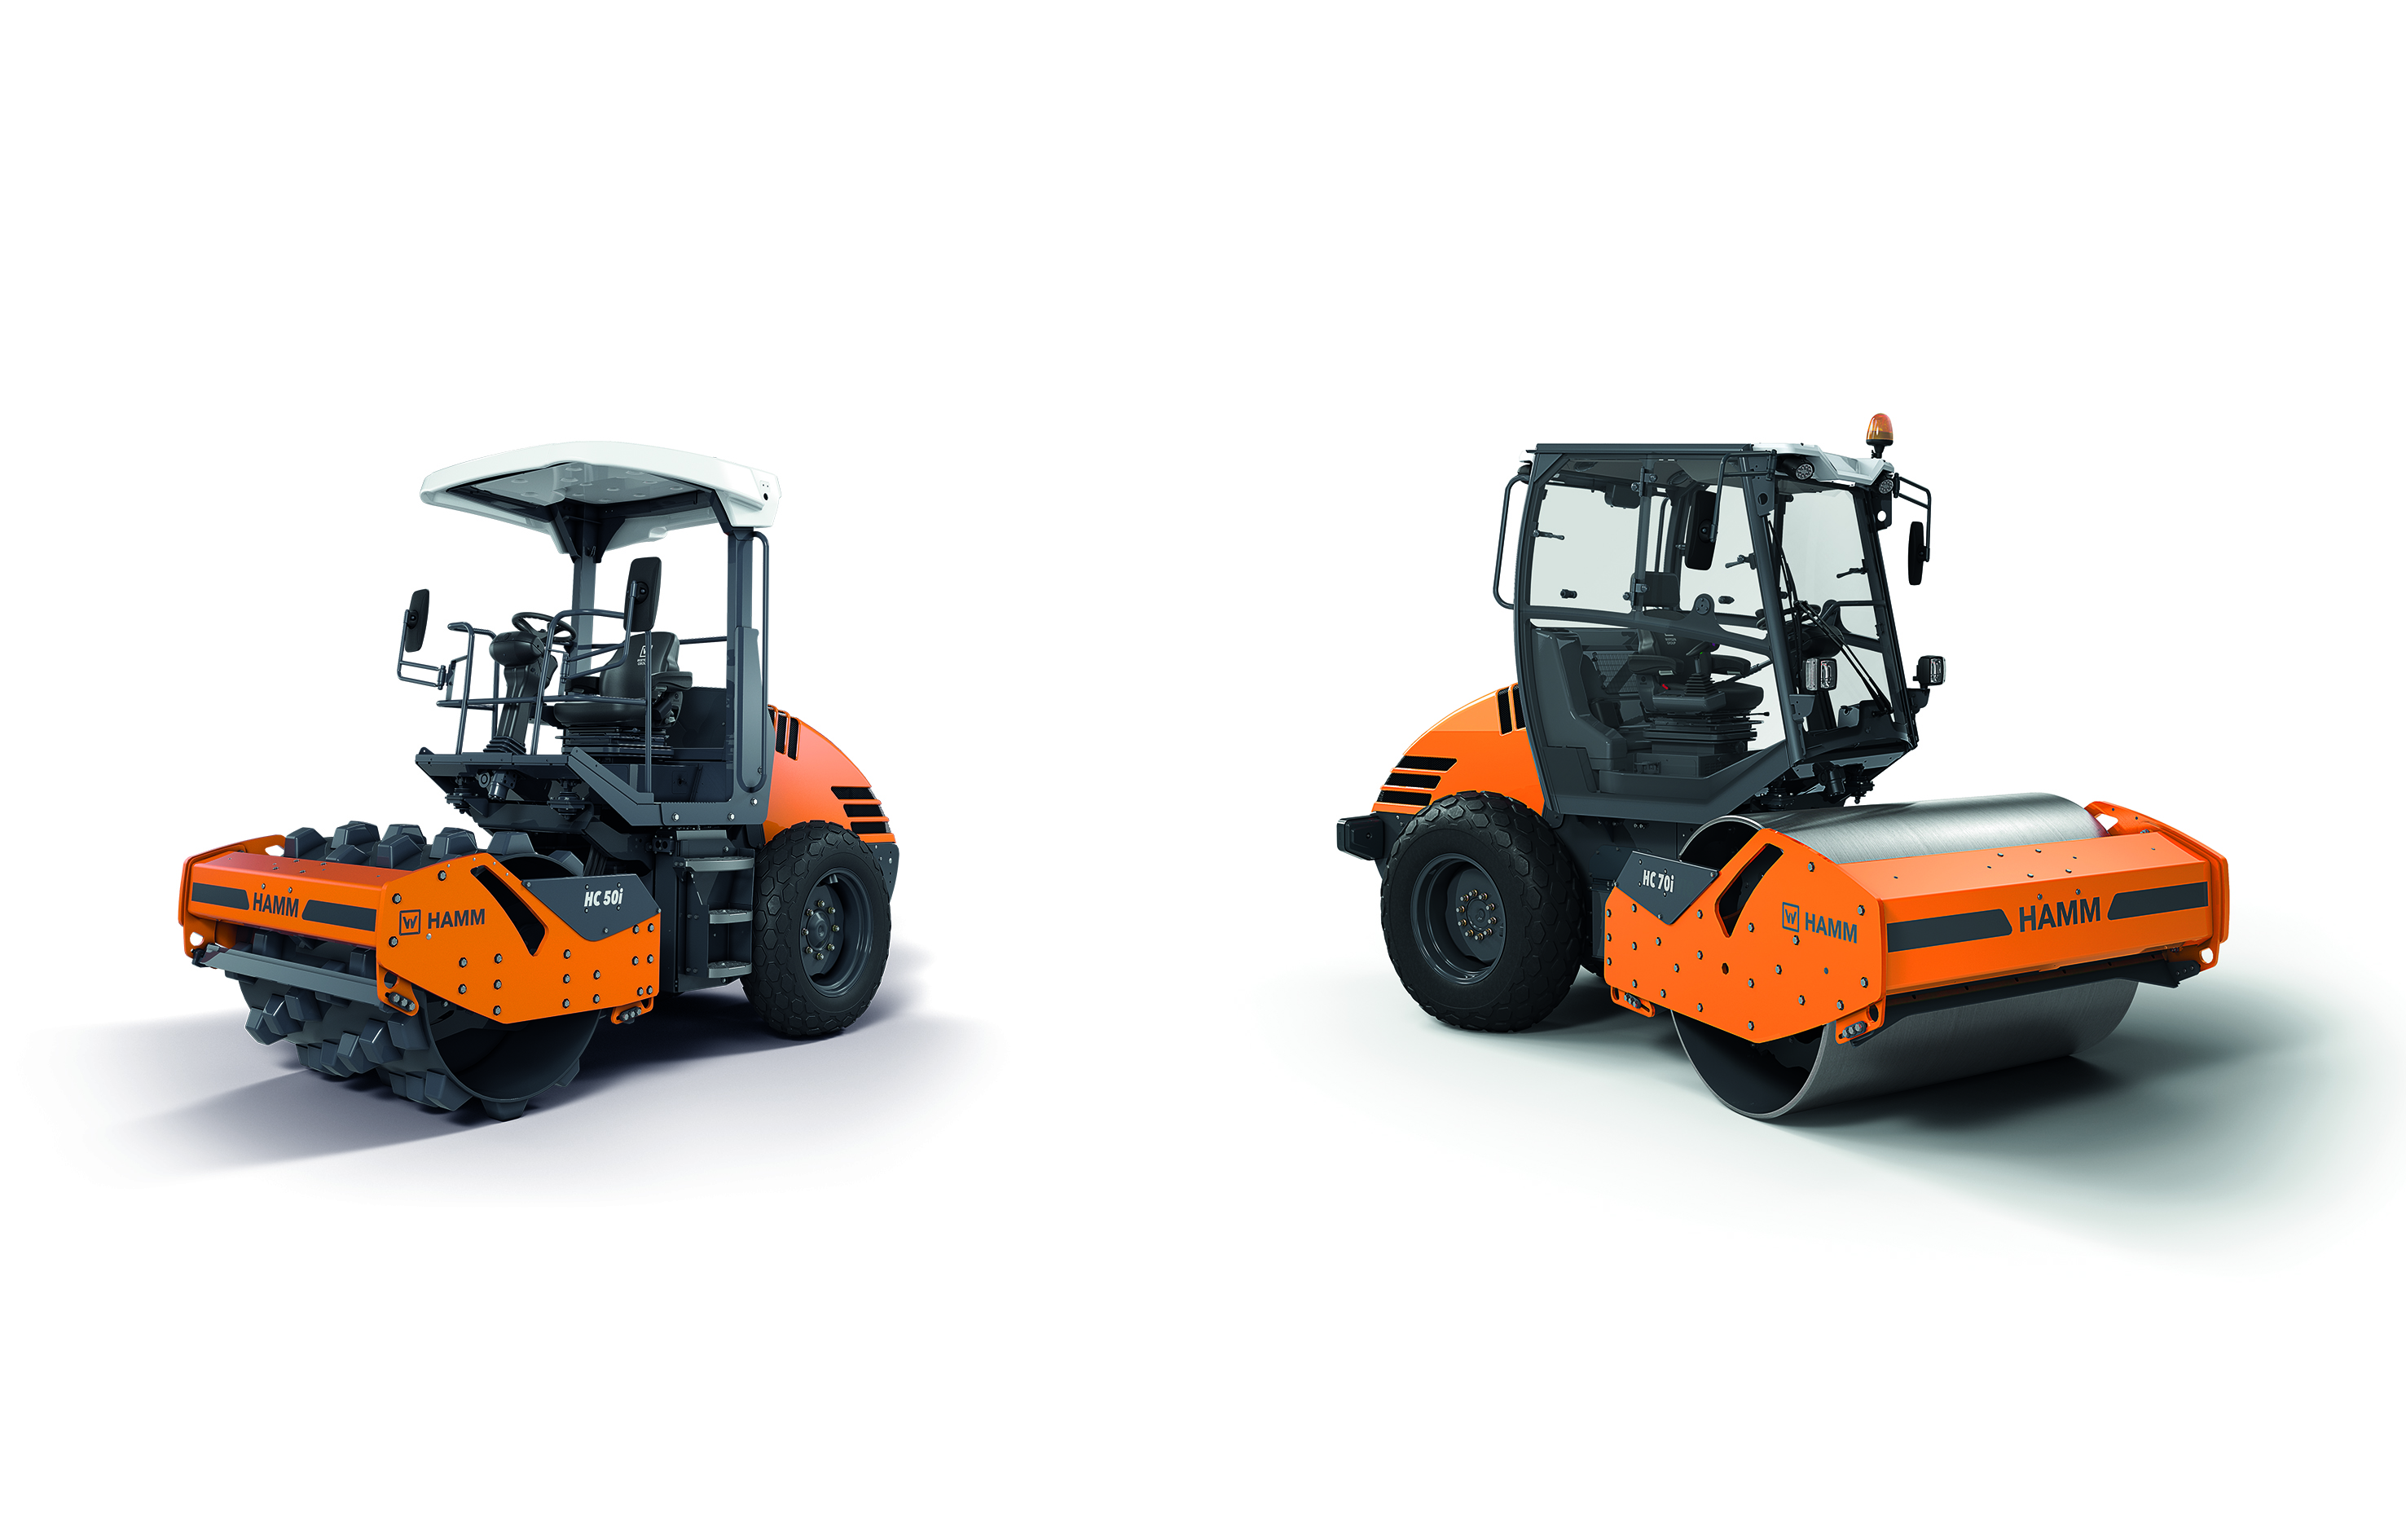 The new HC CompactLine of small compactors from Hamm are never higher than 3 m – with the ROPS cab and with ROPS plus a protective roof.